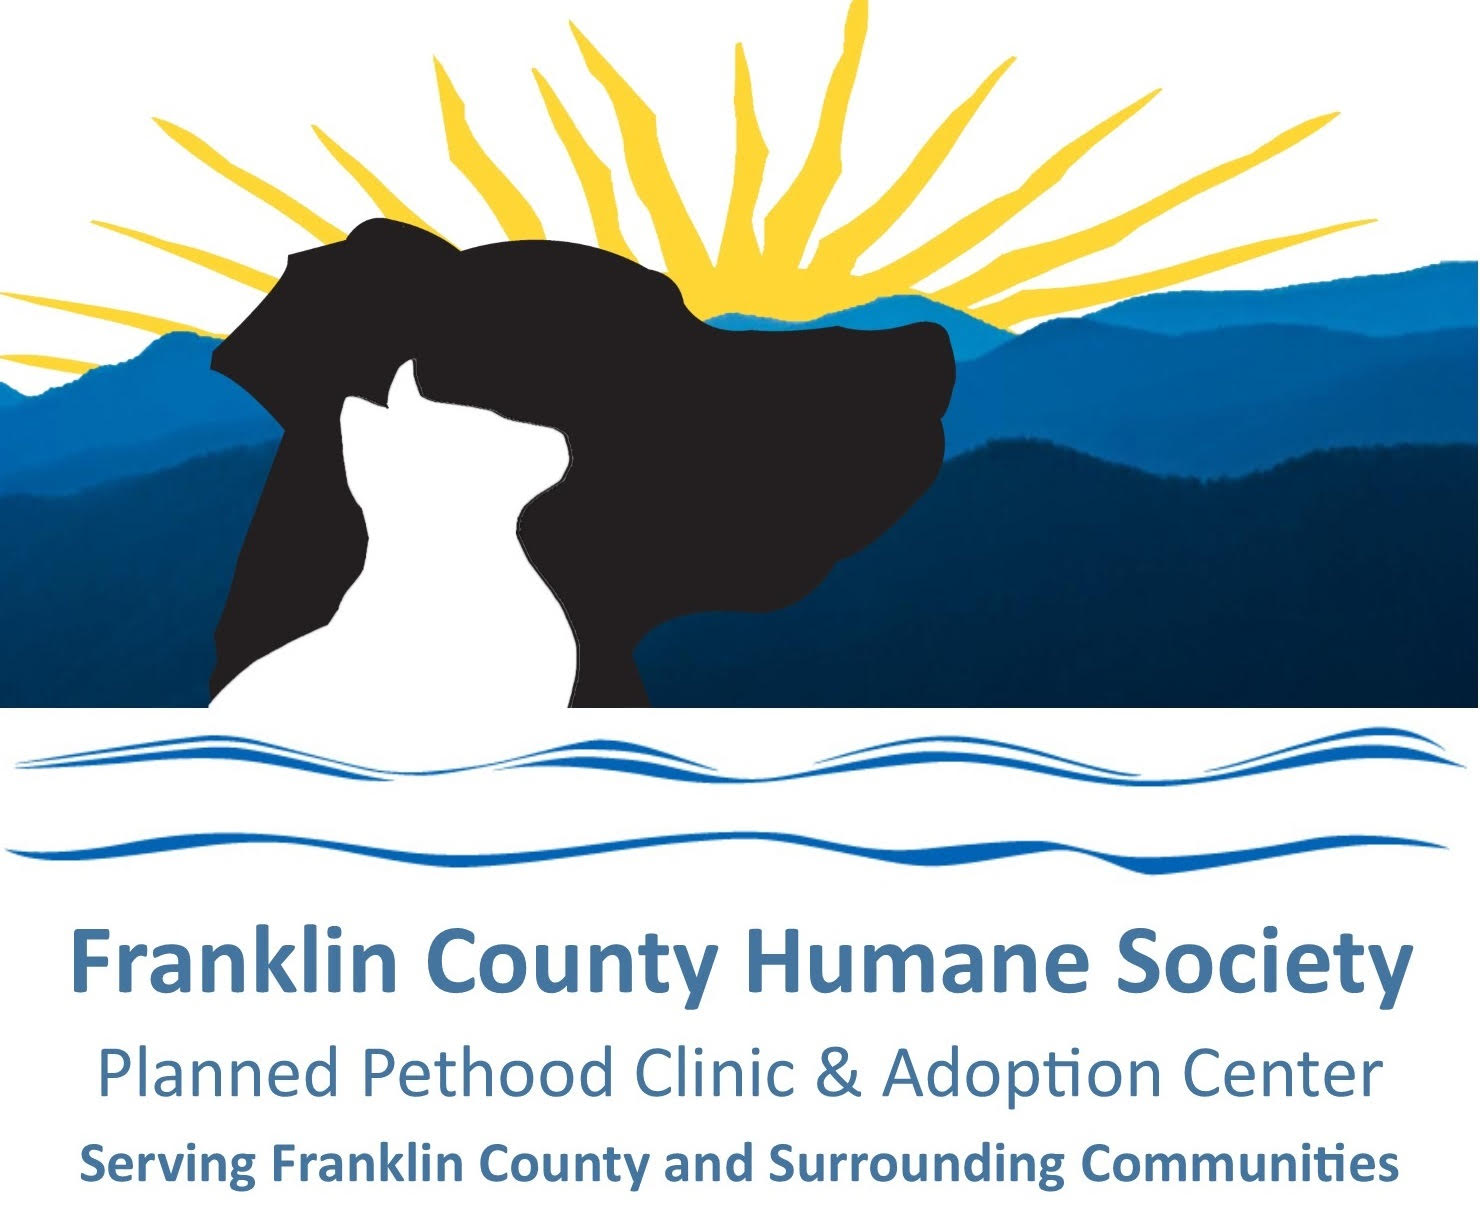 Planned Pethood Clinic & Adoption Center/Franklin County Humane Society